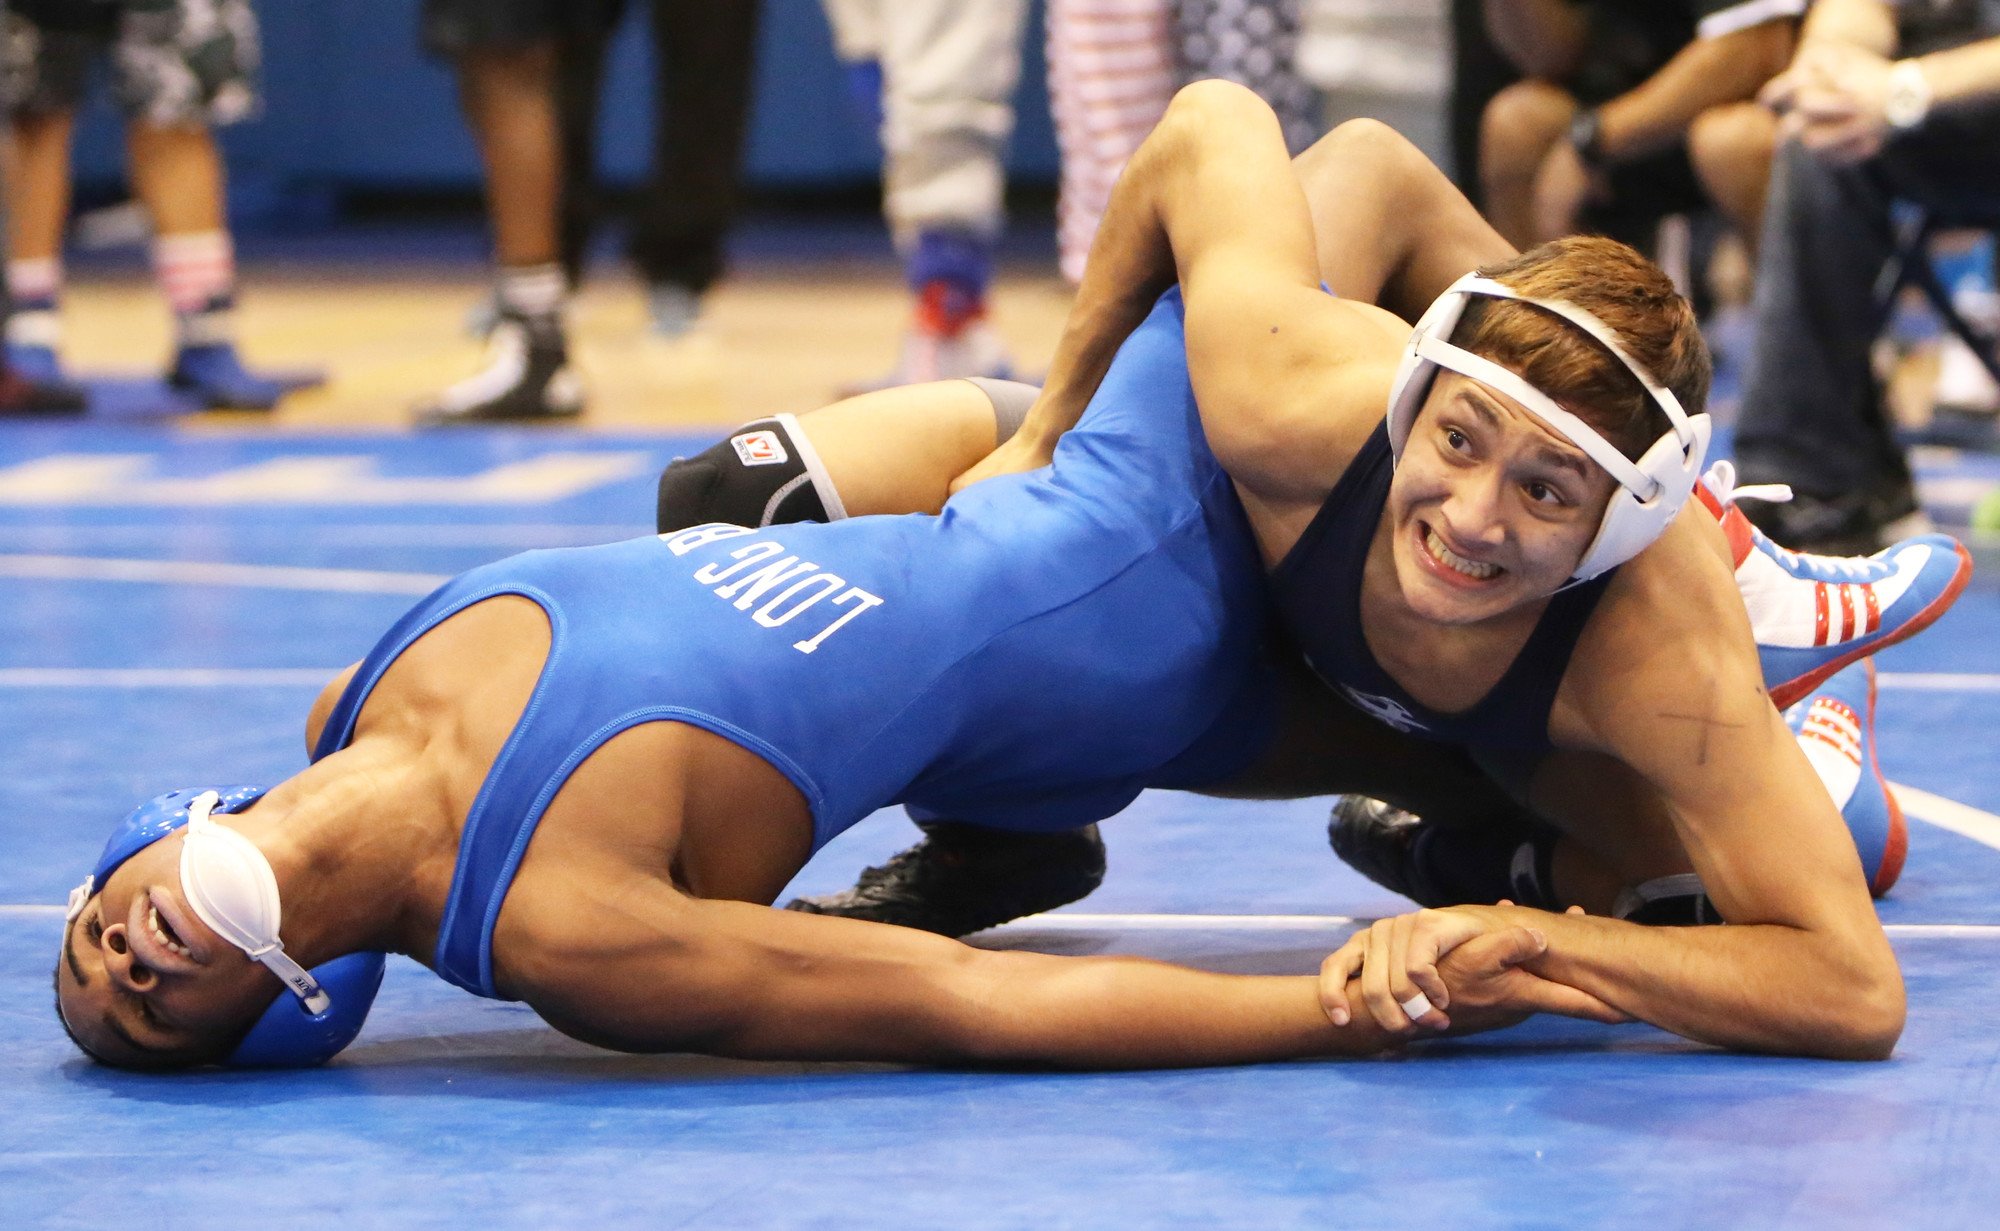 Oceanside’s Kash Calderon, right, captured the 126-pound title at the Nassau wrestling qualifier hosted by Long Beach last Saturday with a 5-4 victory in double overtime in the finals.